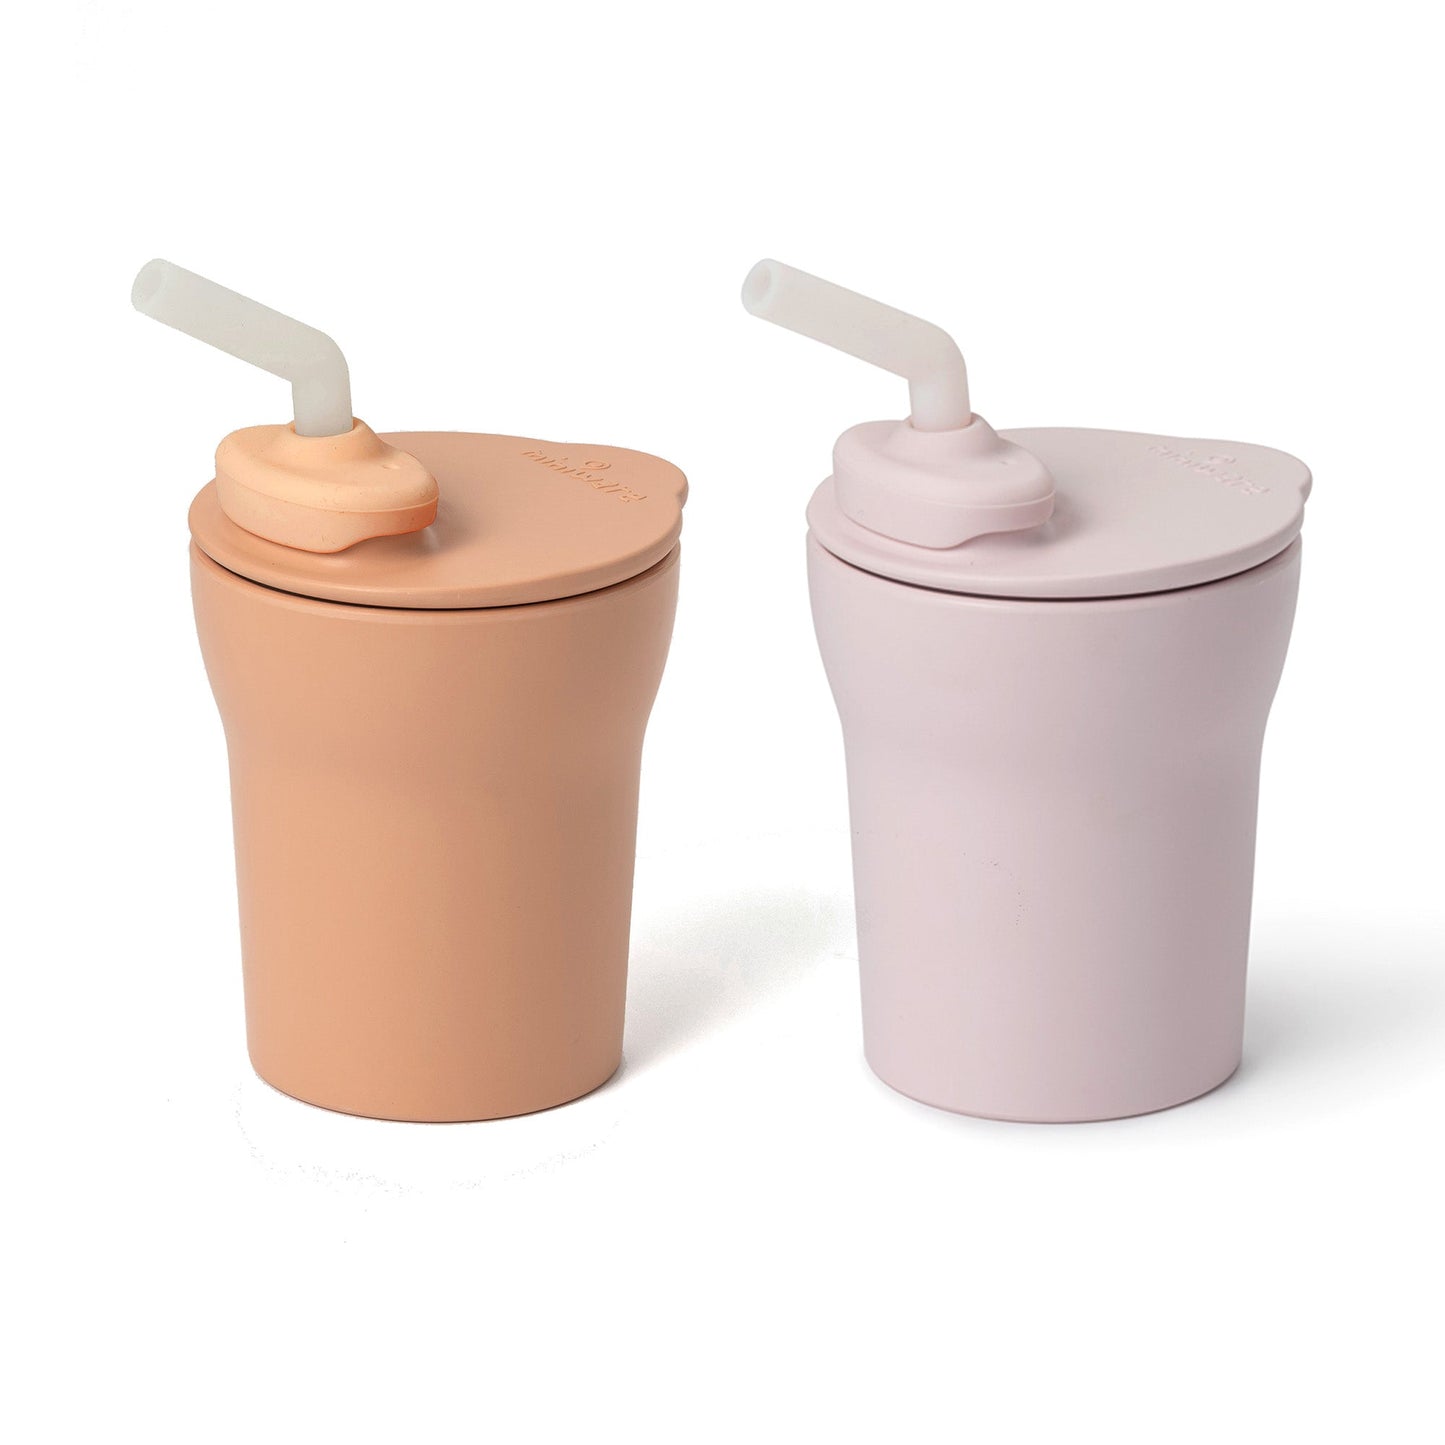 1-2-3 Sip! Barnmugg, 2-pack (Toffee/Cotton Candy)